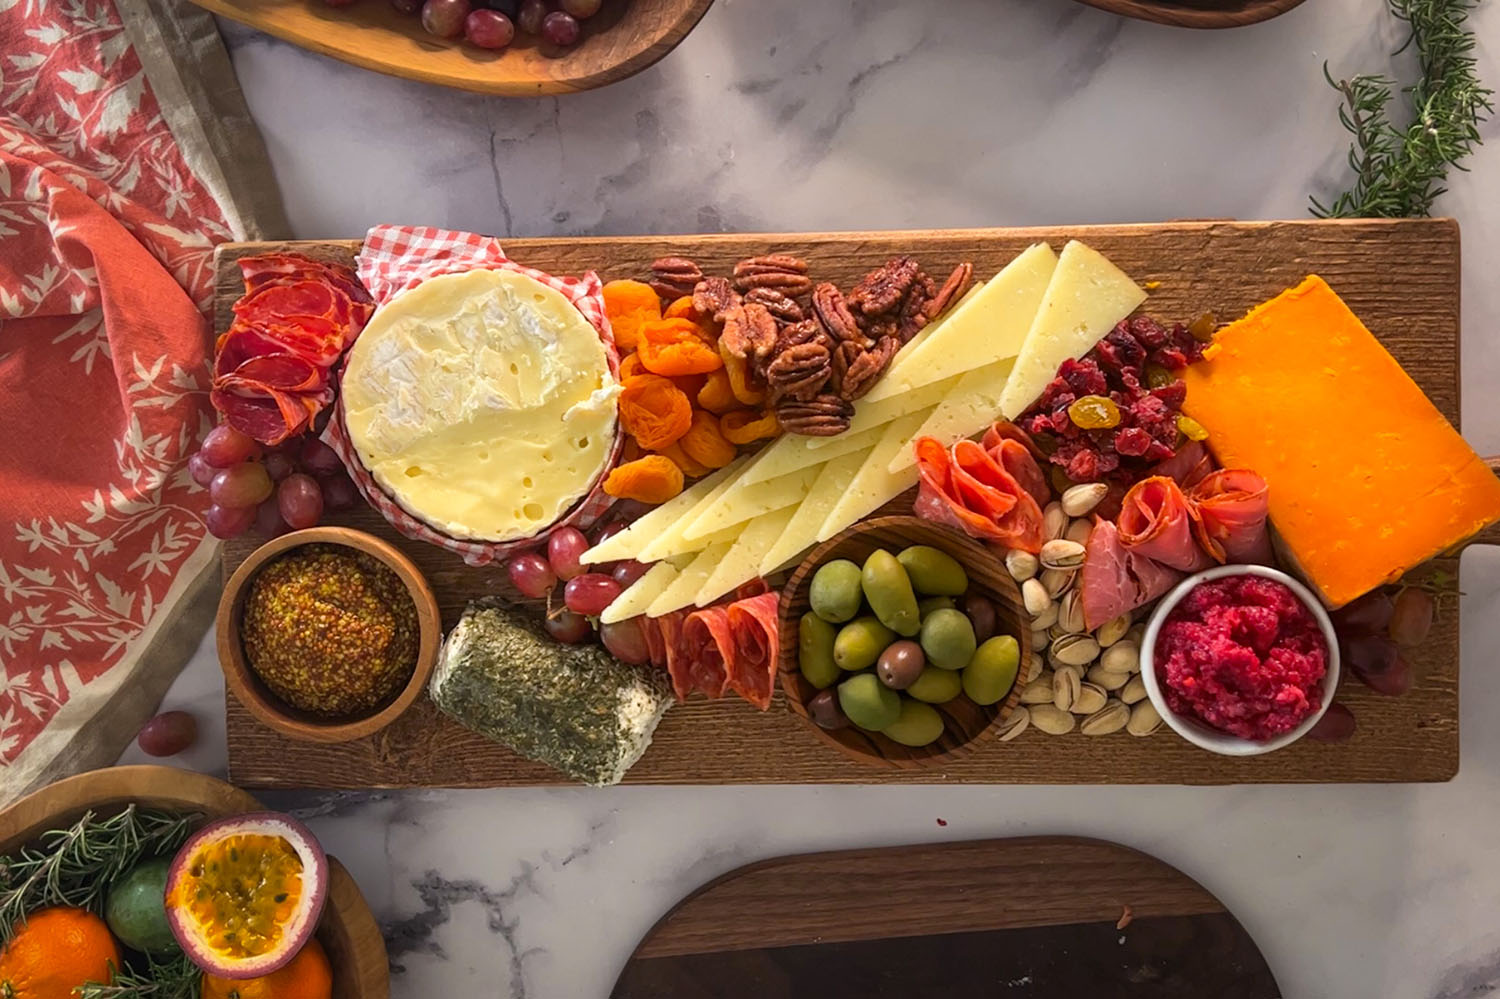 Charcuterie board with dips, olives, grapes, cheeses, folded meats, dried fruits and nuts